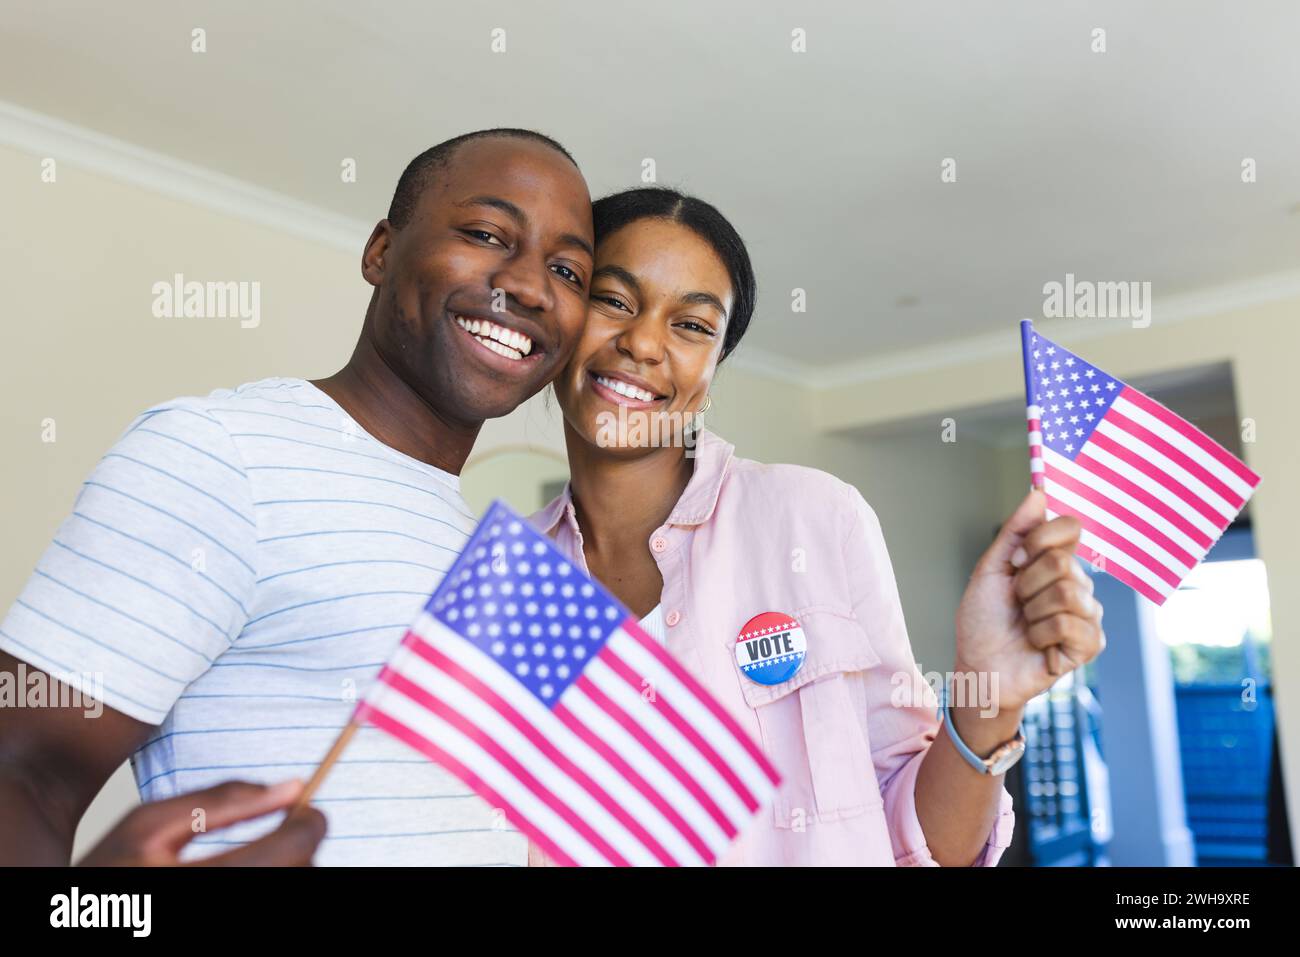 Couple proudly displays voting stickers, celebrating democracy at home. Stock Photo